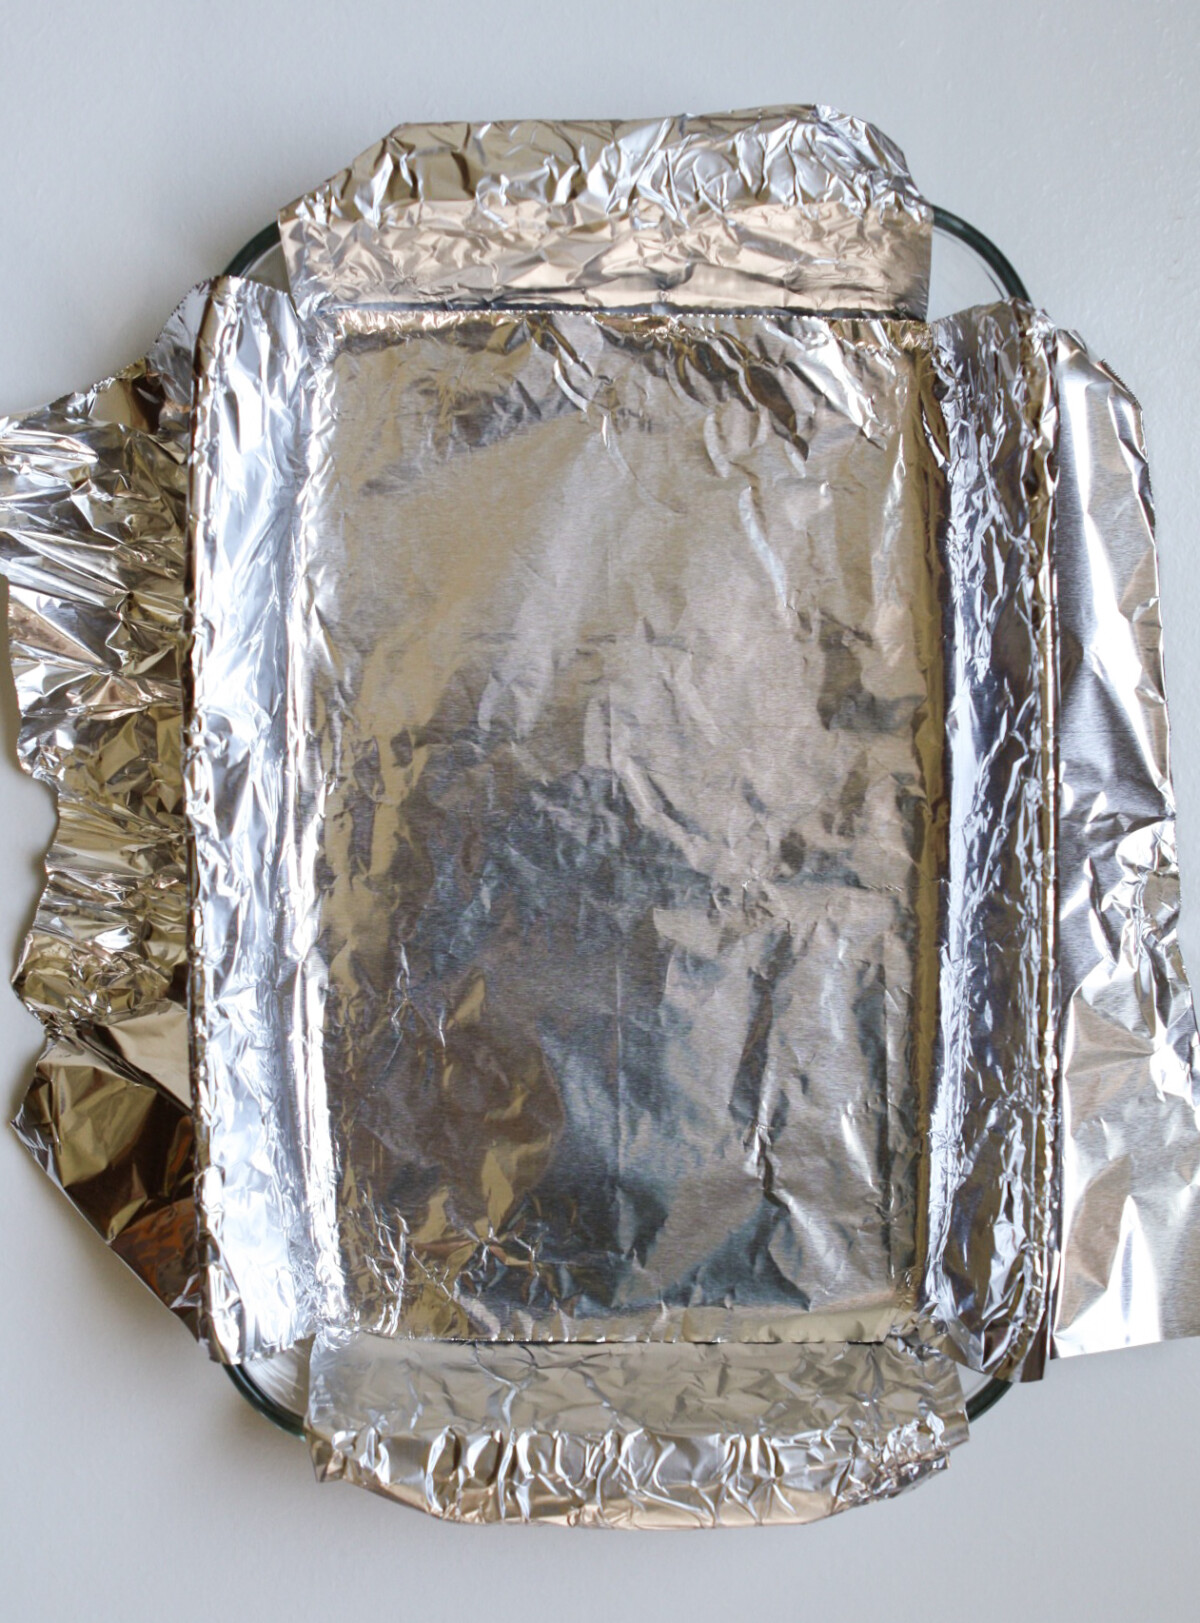 photograph of a foil-lined baking dish